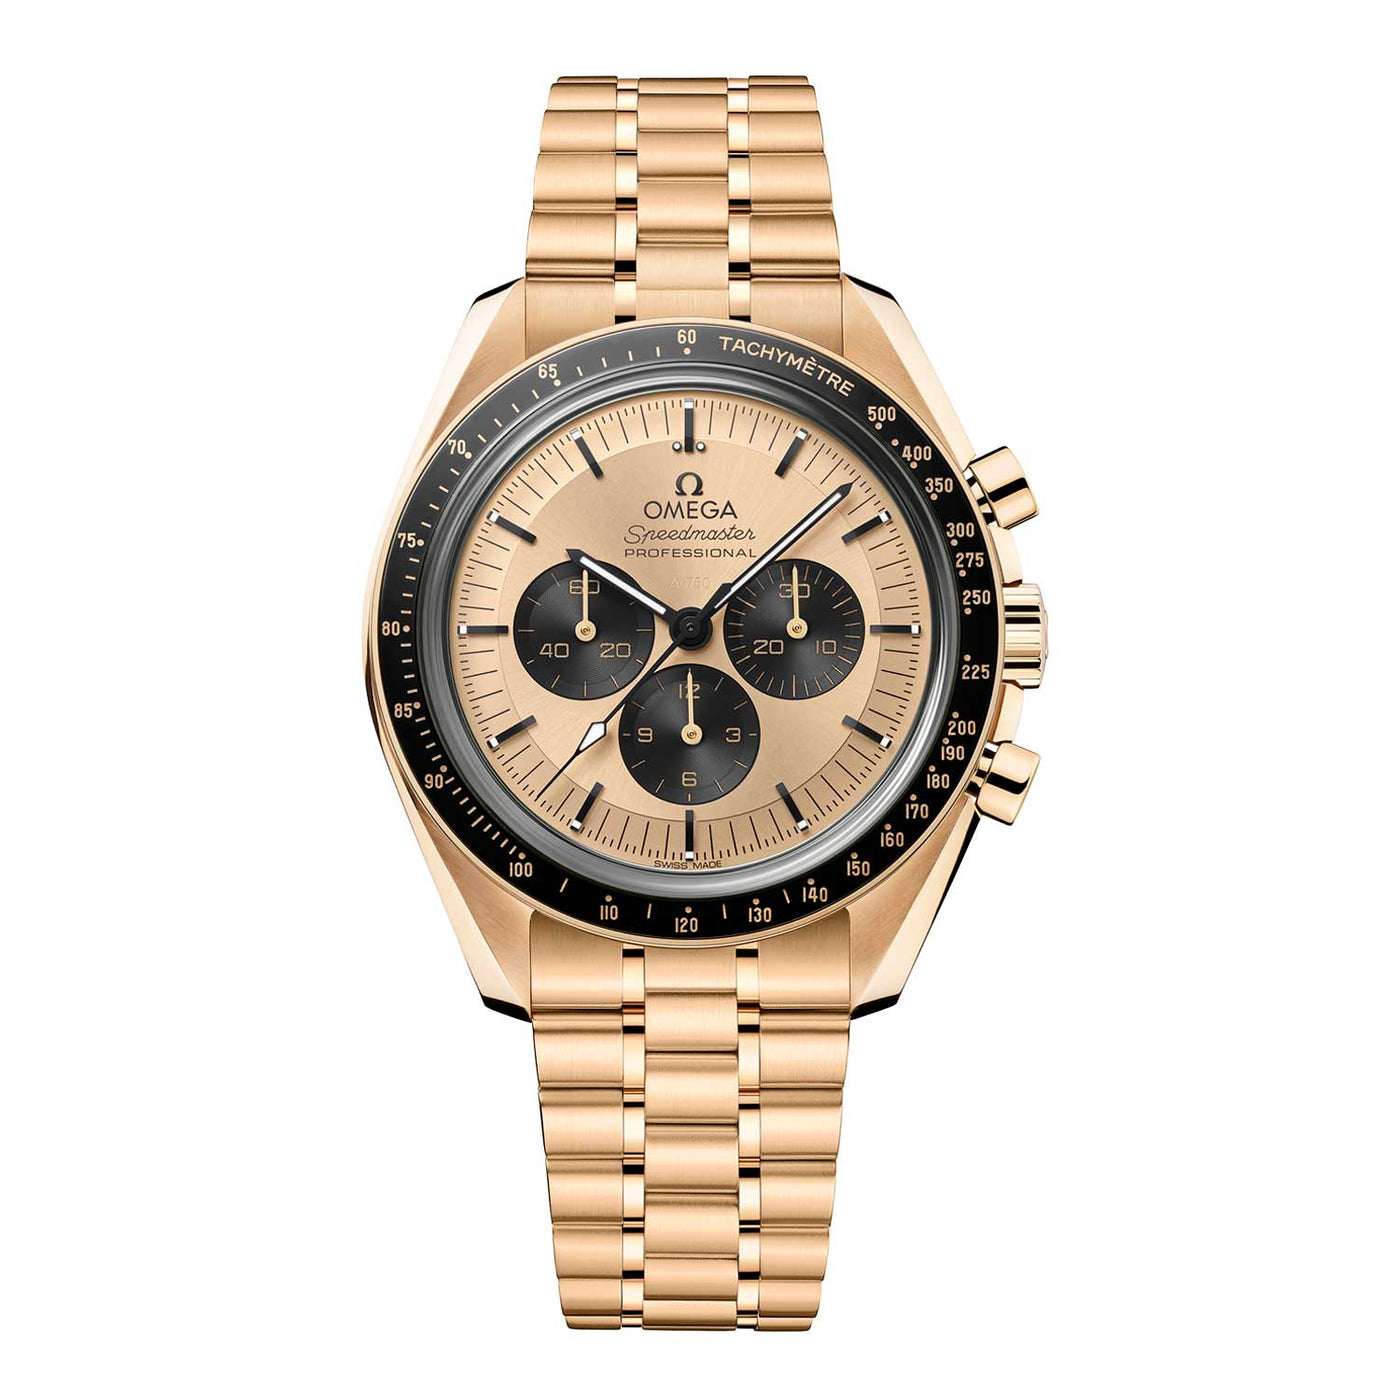 OMEGA Speedmaster Moonwatch Professional Co-Axial Master Chronometer Automatic – 310.60.42.50.99.002